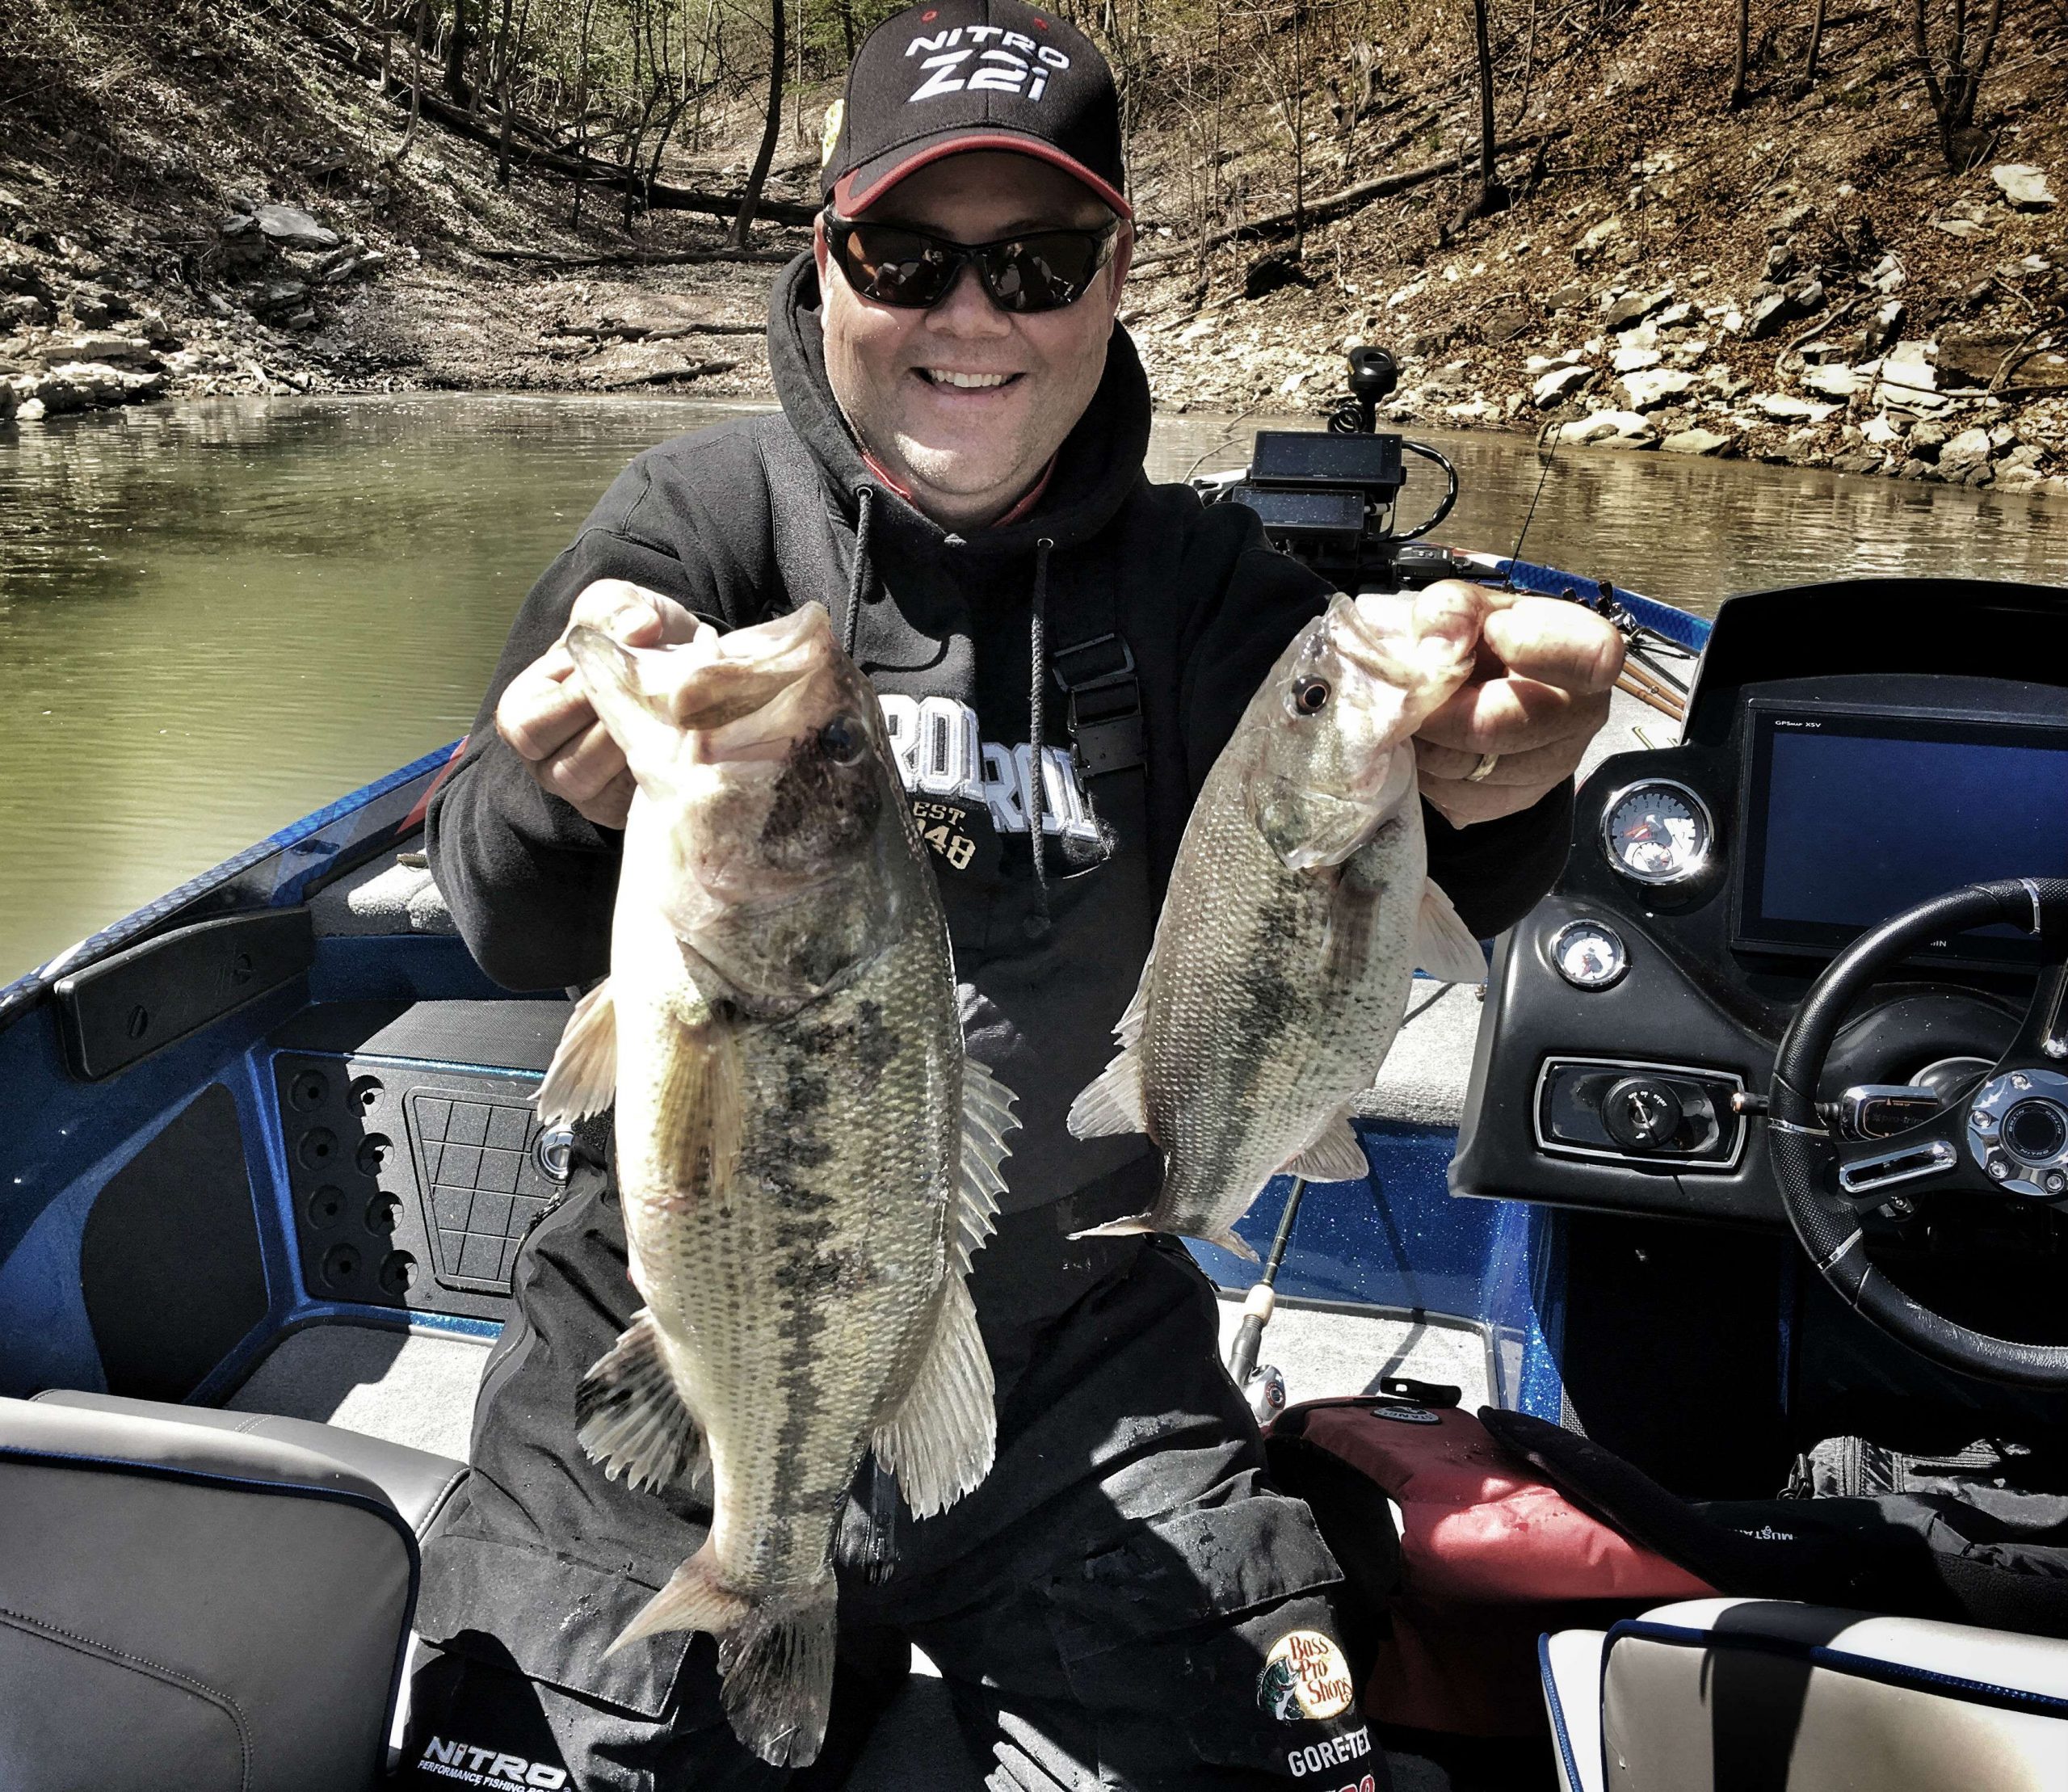 Thereâs no easier way to put a smile on an angler face than a 4-pound cull